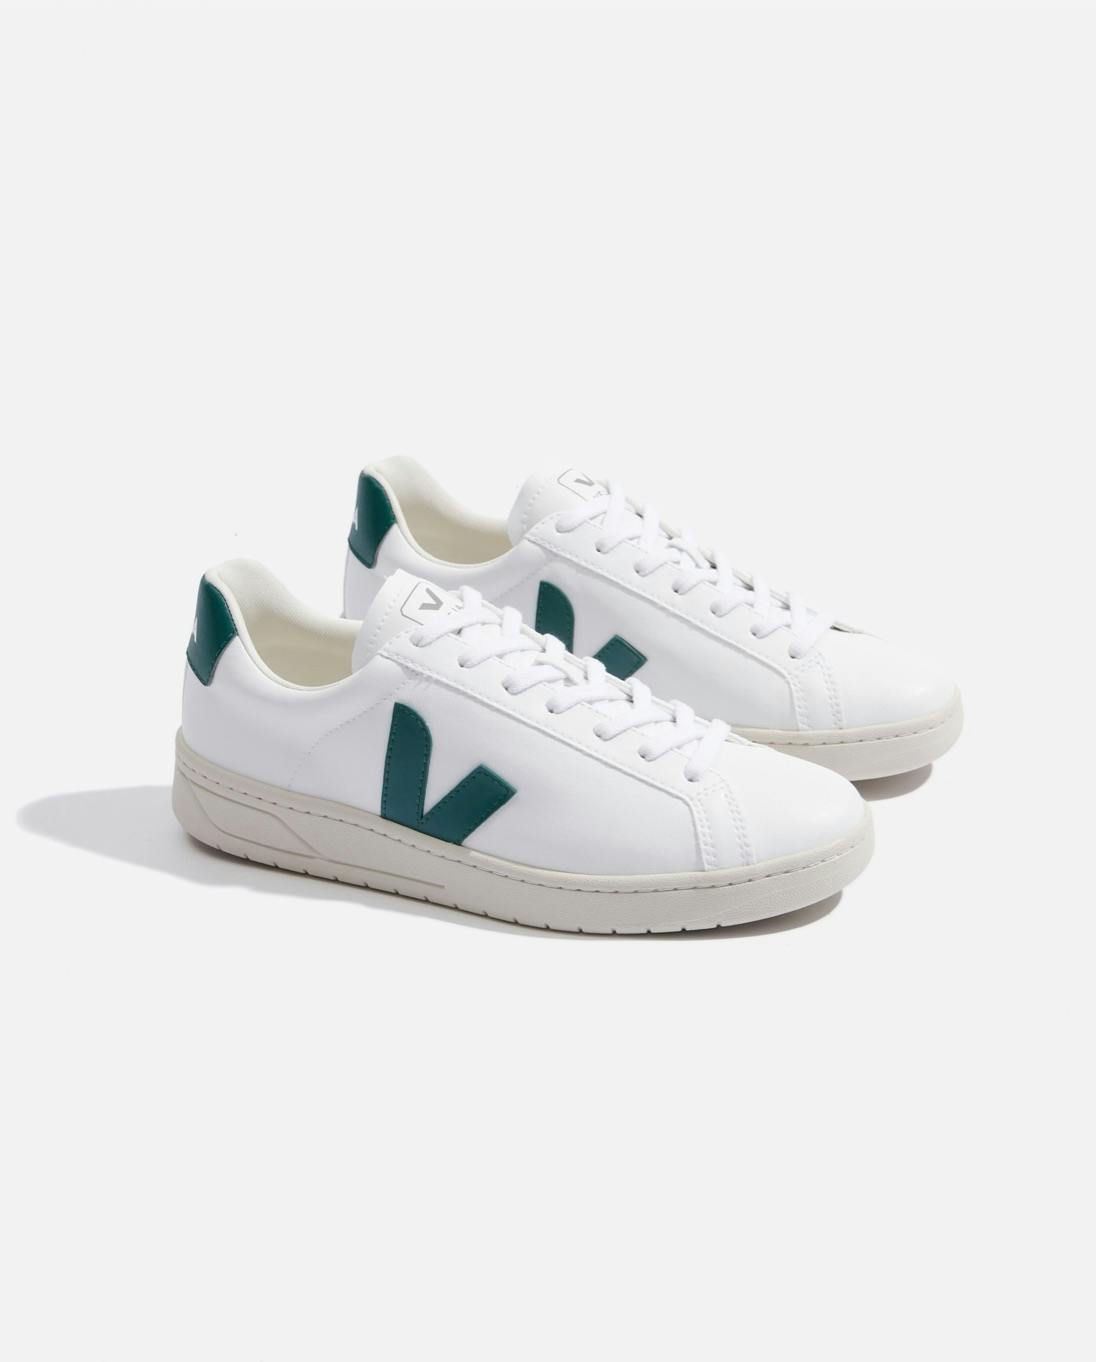 Veja's New Vegan Sneakers are Made With Corn Leather